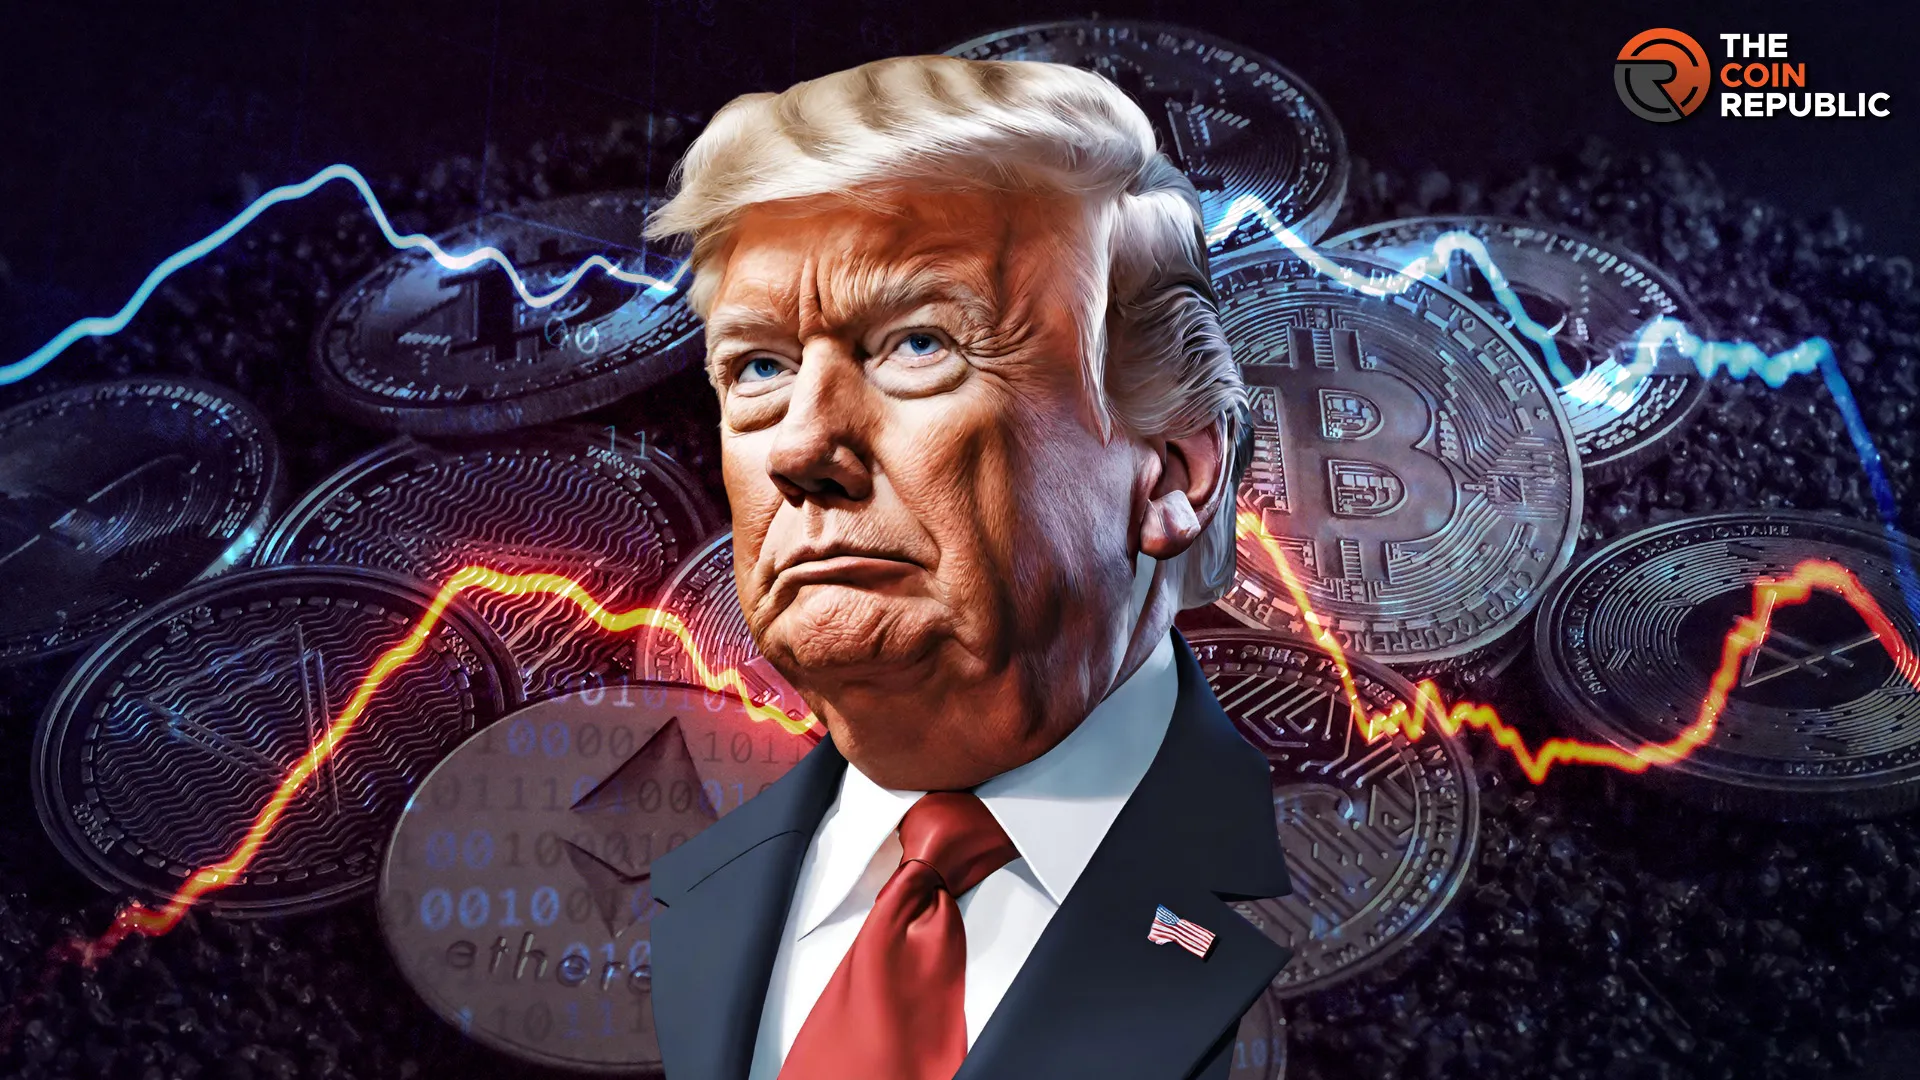 Who is Being Favored in the Crypto Community, Trump or Biden?